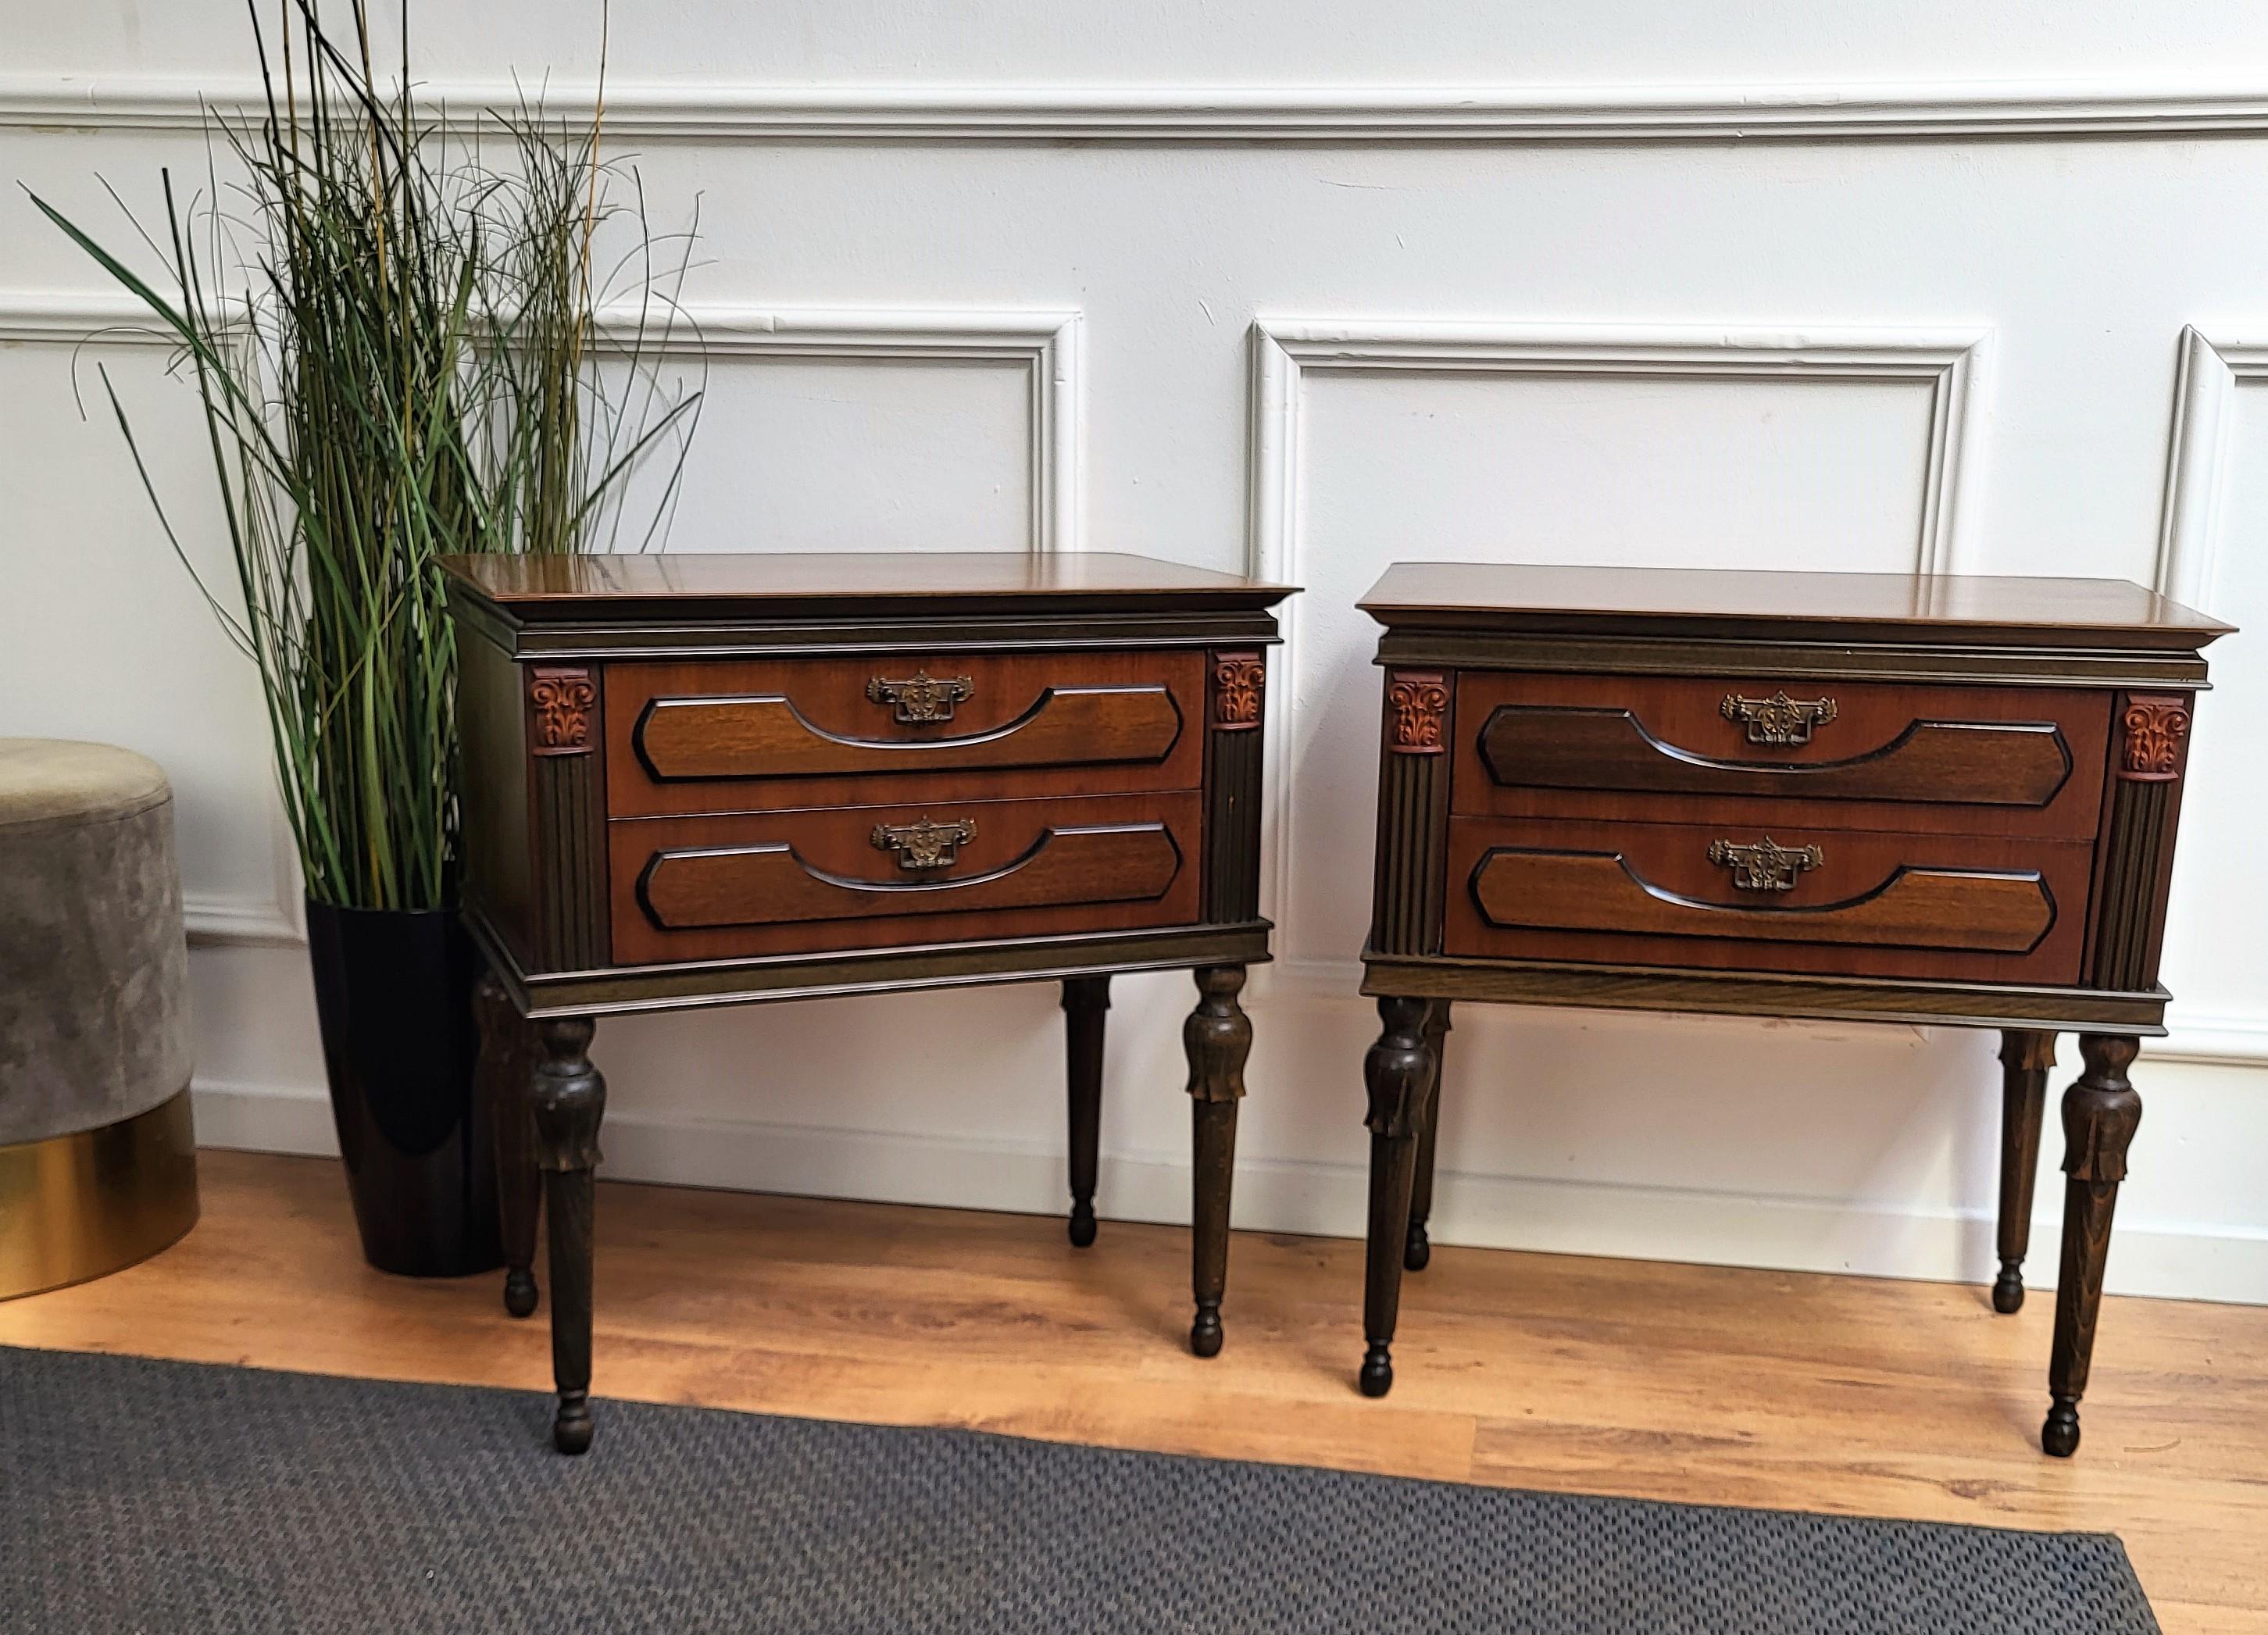 Very elegant and refined Italian 1960s neoclassical art deco pair of bedside tables with carved and decorated walnut and fruitwood, 2 drawers with carved legs. Those nightstands make a great look in any style bedroom, as a complementary design or as